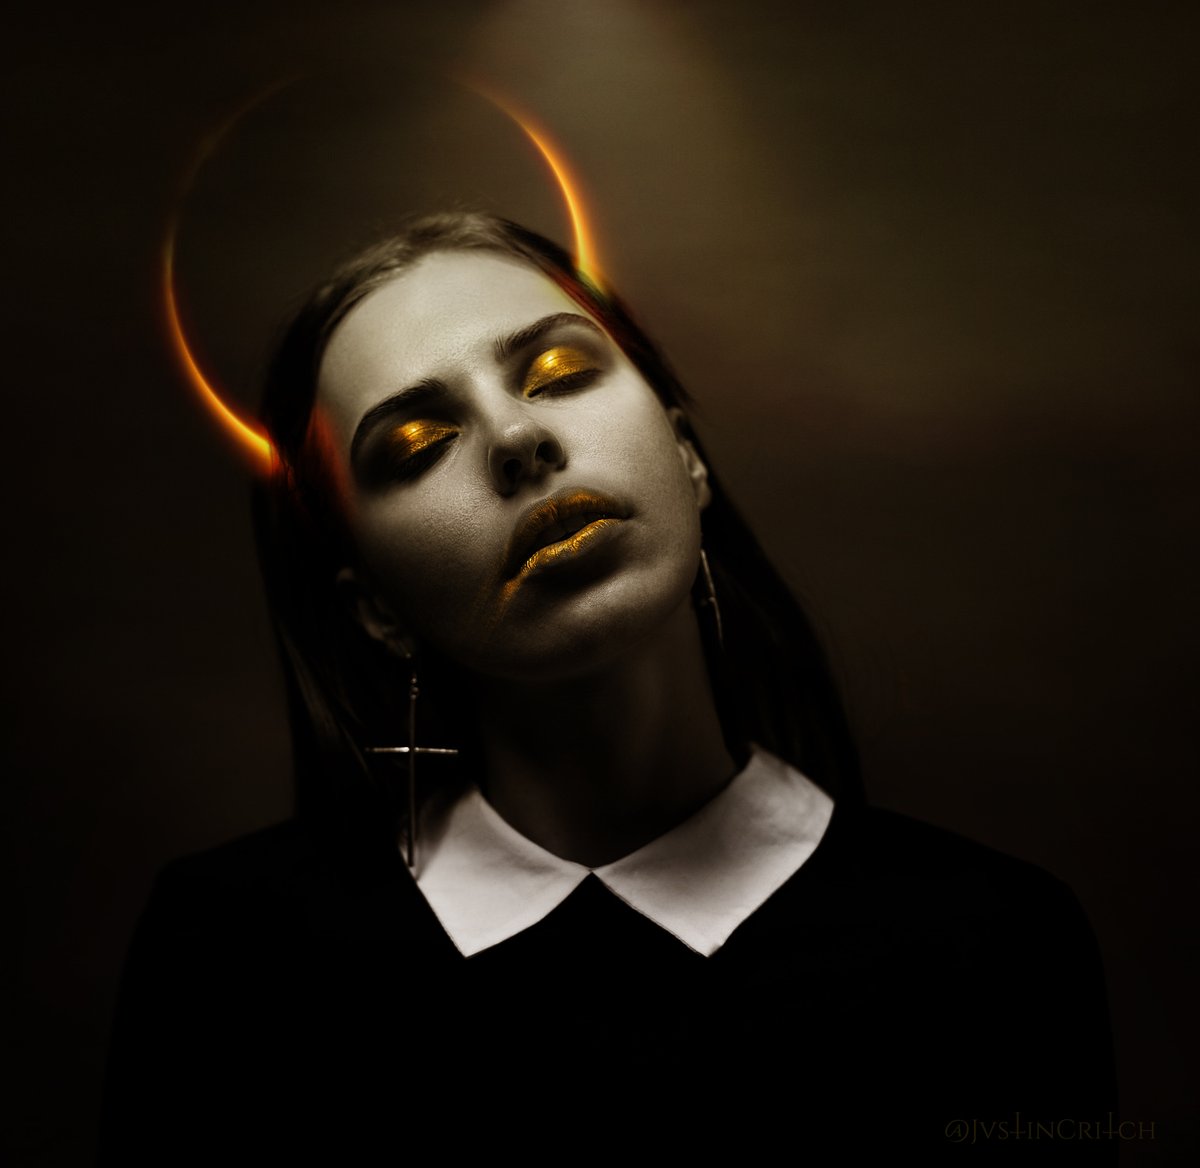 'Redeemer'

Some #newArtwork for your Tuesday. If you'd like to check out more of my stuff, hit the link in my bio. 

#darkArt #photomanipulation #madeWithPhotoshop @Photoshop 

Resources used listed in the comments.